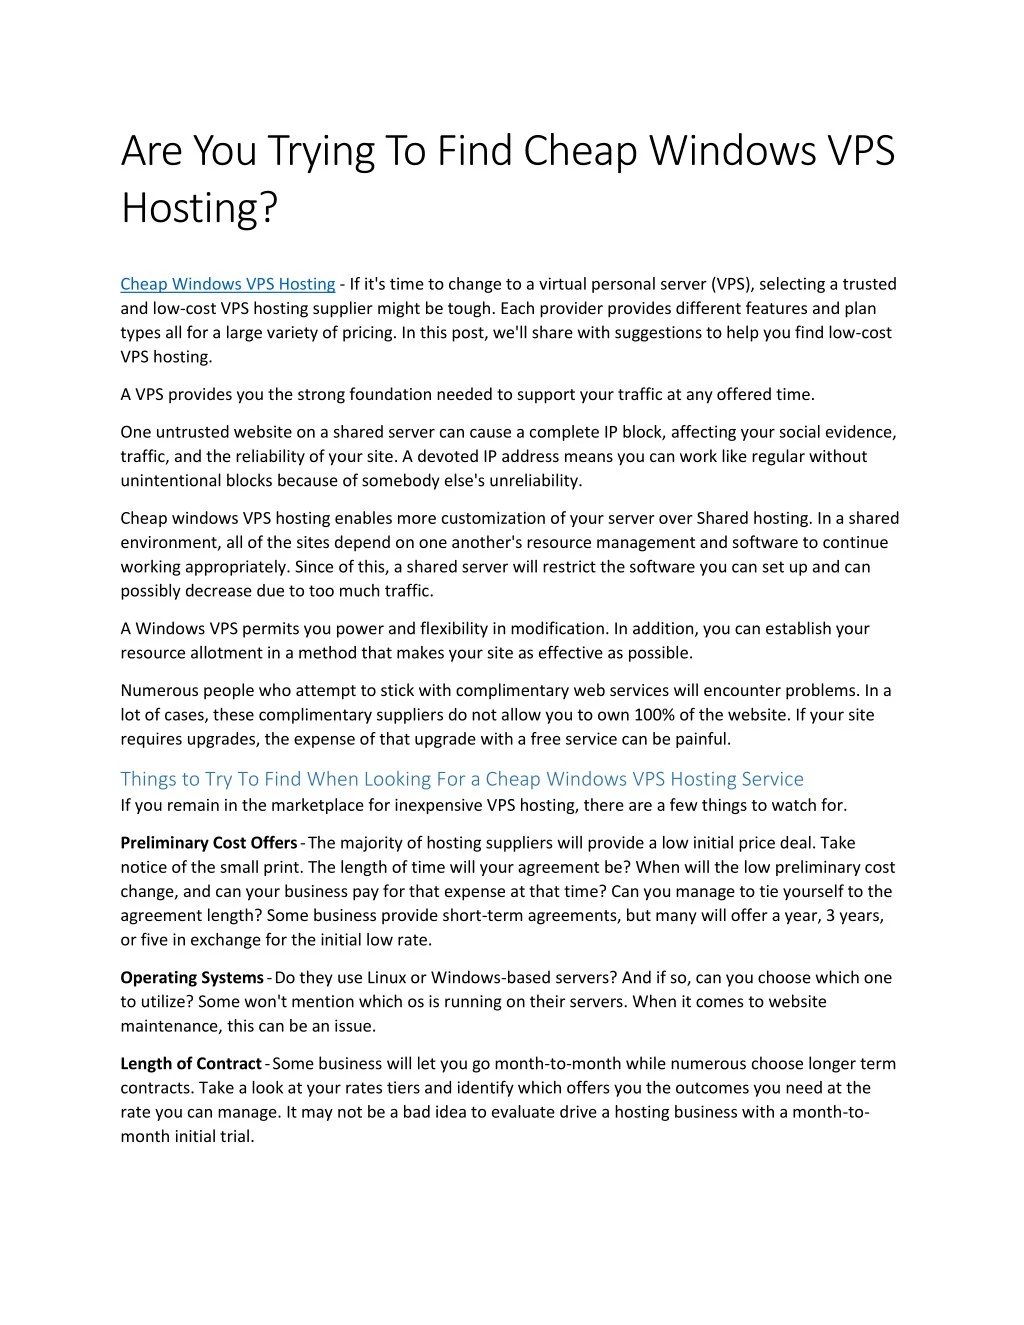 are you trying to find cheap windows vps hosting